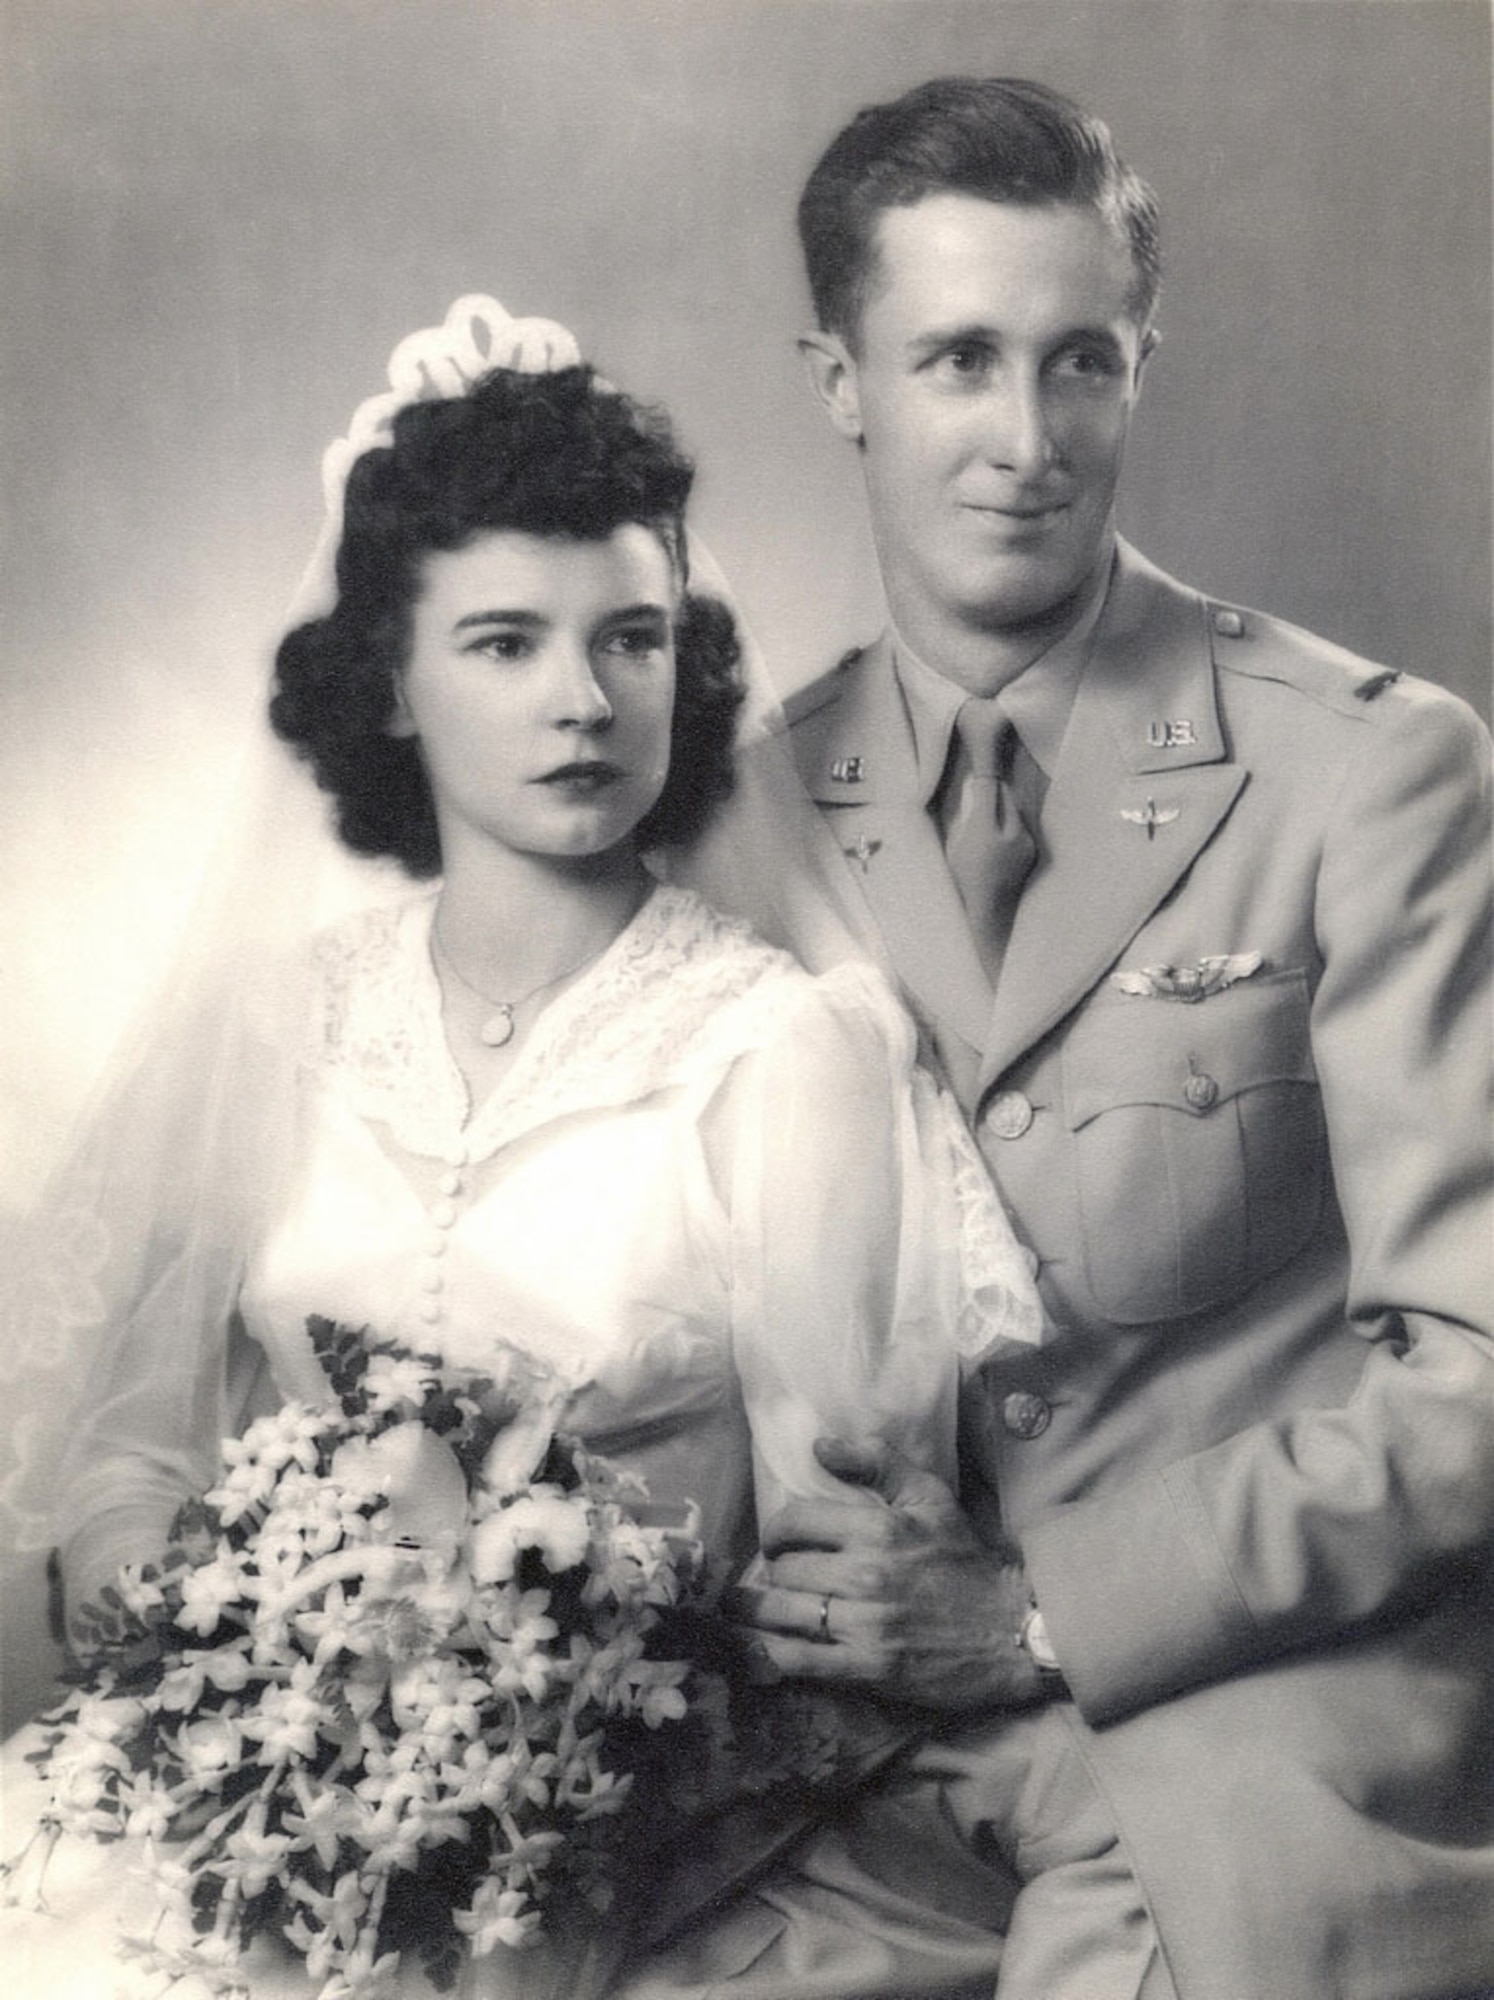 U.S. Army Air Corps 1st Lt. John D. Crouchley and his wife Dorothy, pose for their wedding photo in 1943. Crouchley was assigned to the 828th Bombardment Squadron, 485th Bombardment Group, Foggia, Italy, and went into combat in May 1944. His aircraft was shot down over Bulgaria June 28, 1944, when he and his crew were returning from a bombing mission over Romania. He was missing in action for 73 years until his partial remains were discovered by a team from the Defense POW/MIA Accounting Agency in 2017 and positively identified in September 2018. Crouchley’s wedding ring, visible in the photo and engraved with his wife’s initials, was one of the personal items found that was used to identify him. (Courtesy photo)